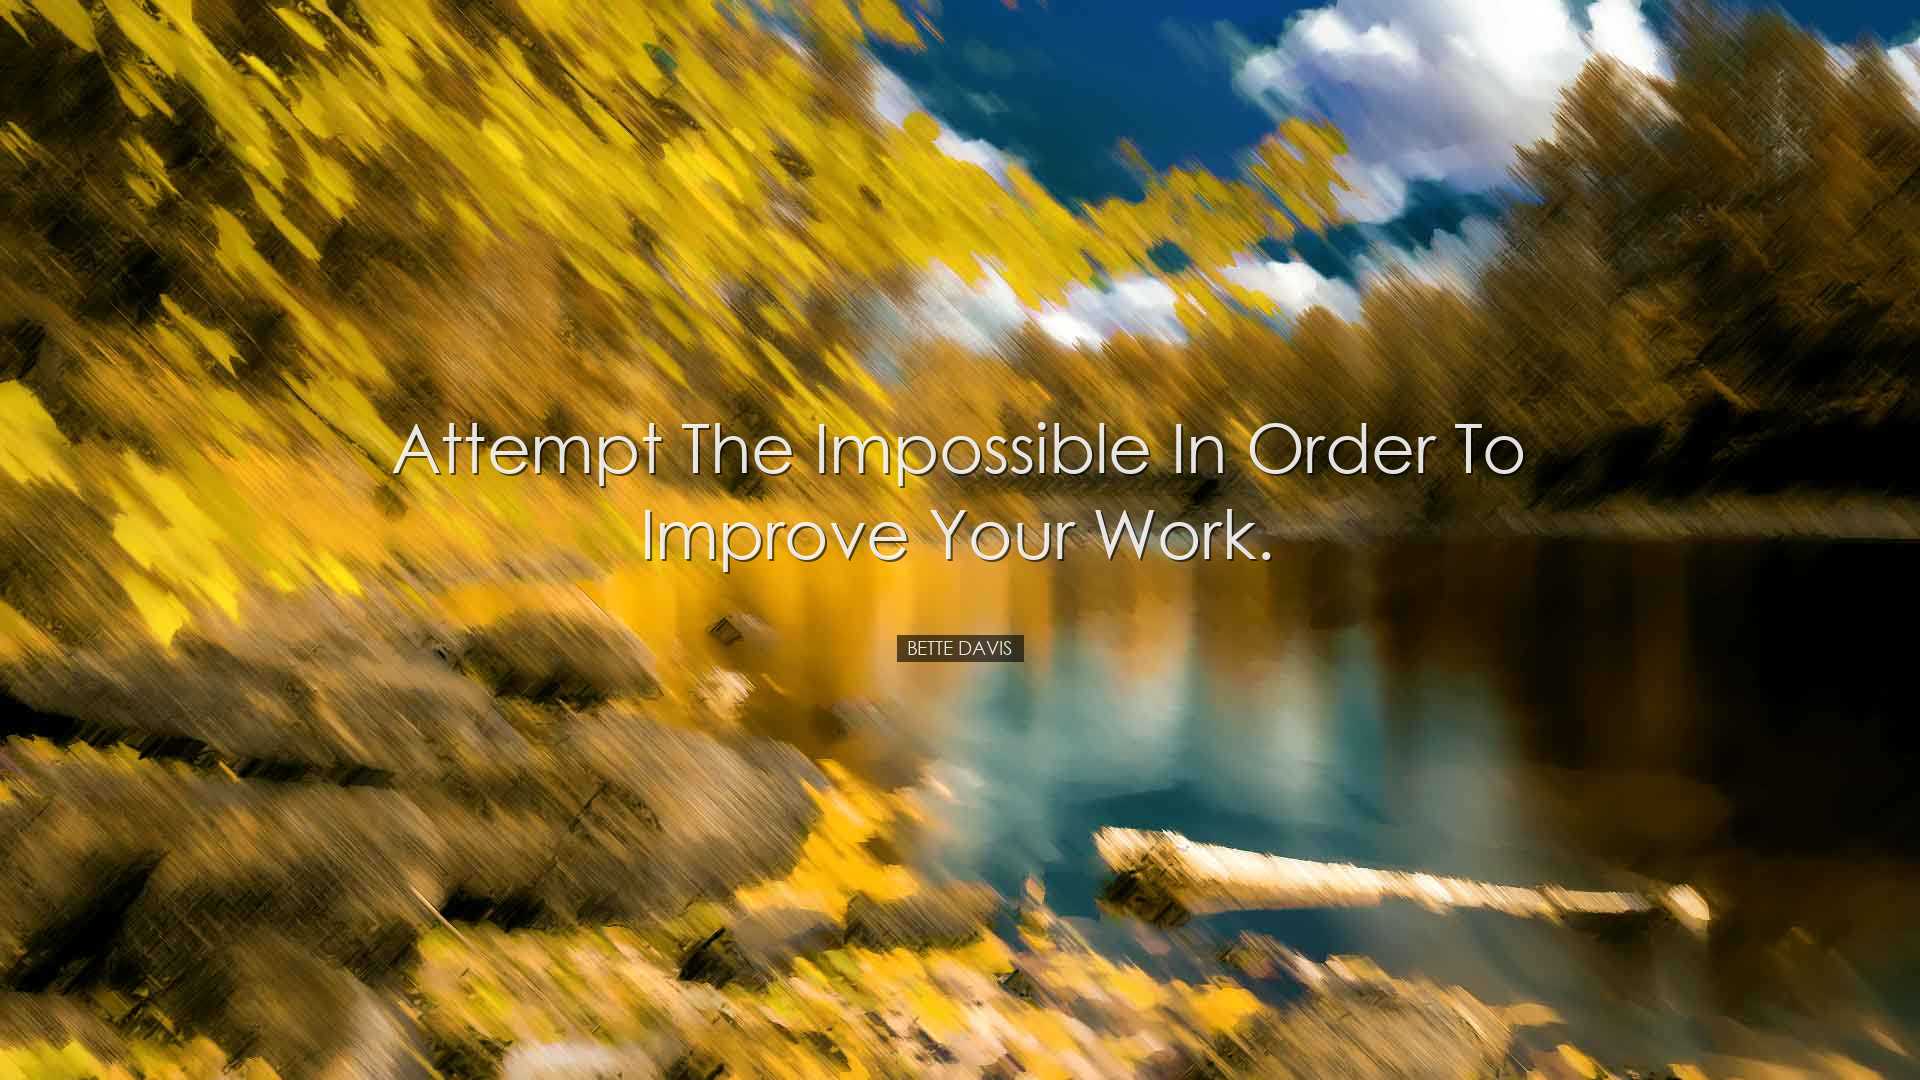 Attempt the impossible in order to improve your work. - Bette Davi